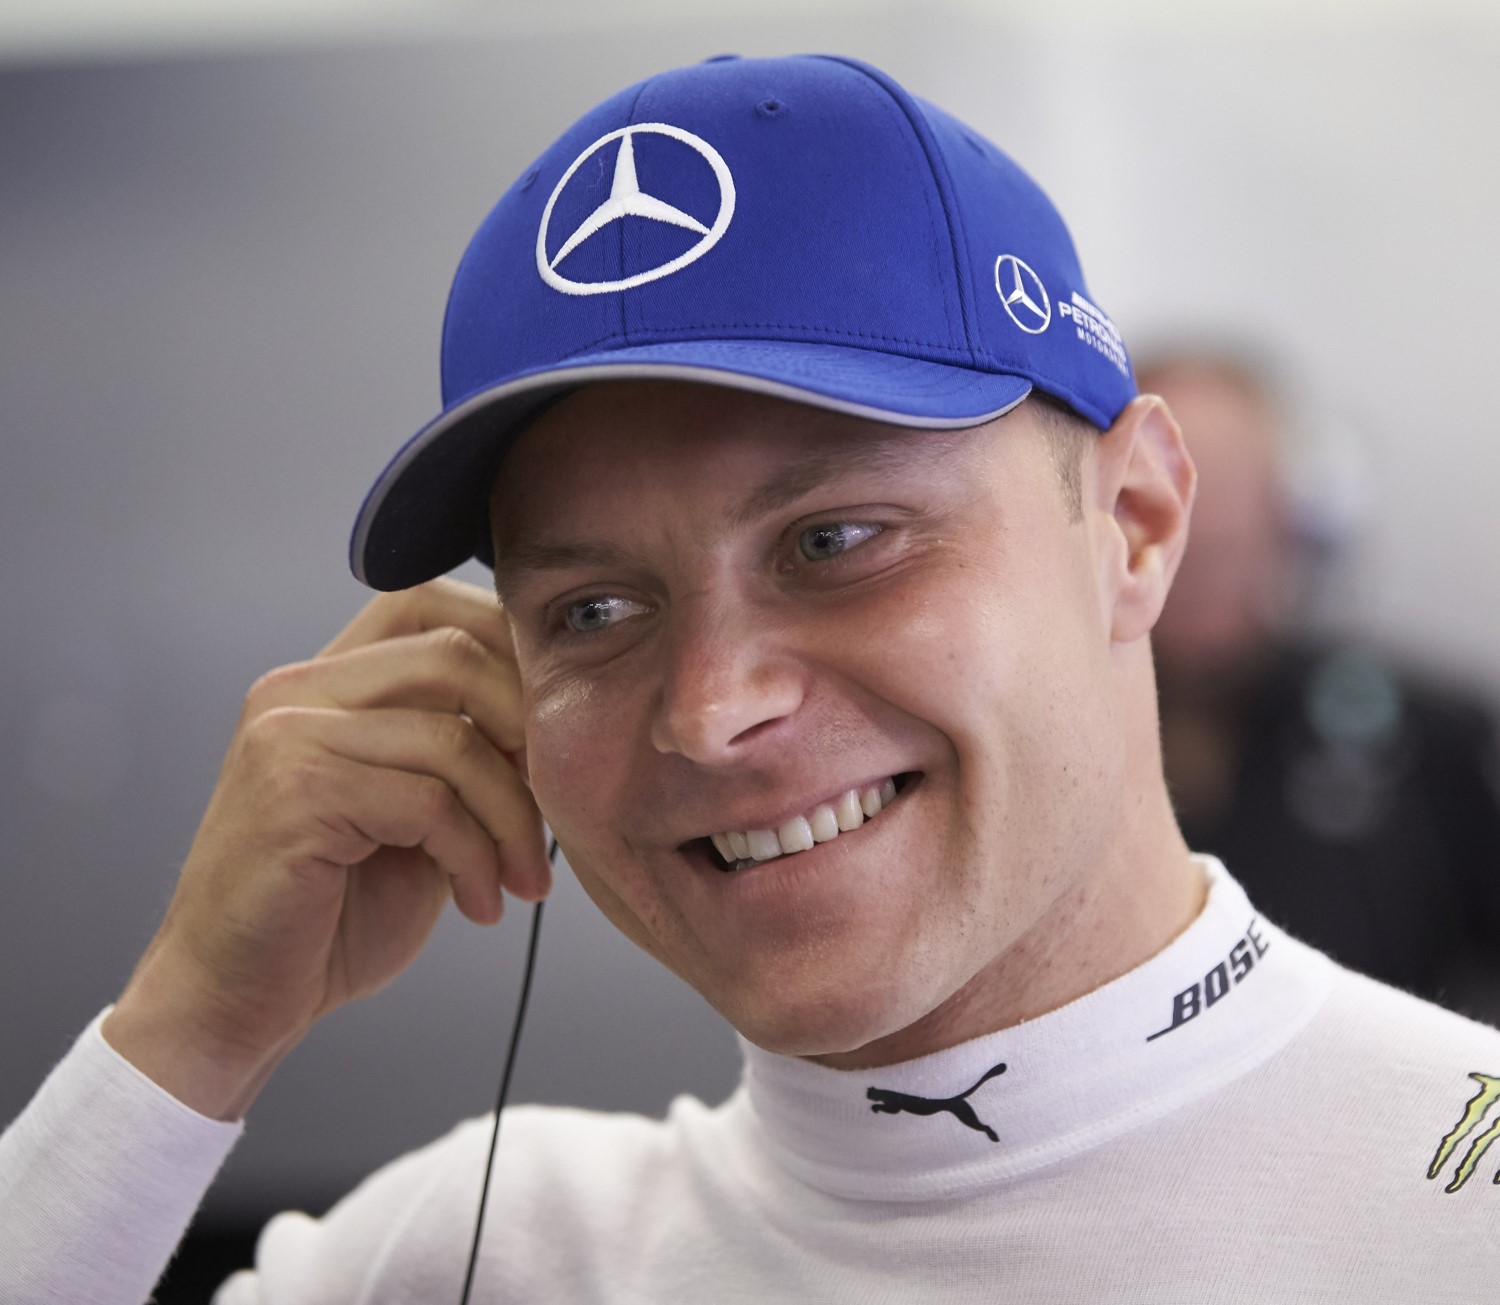 Bottas has eye on title and new contract